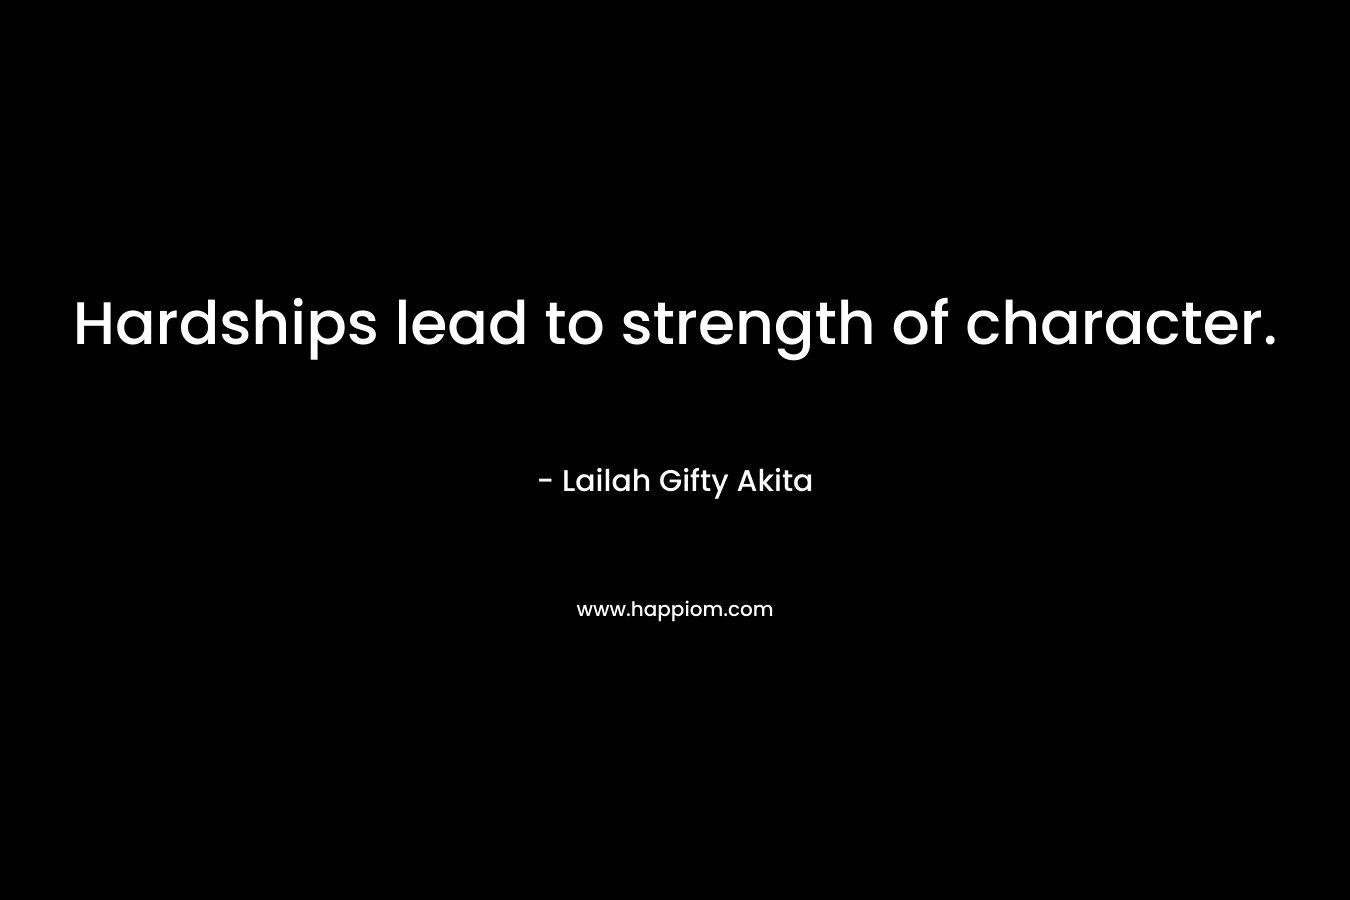 Hardships lead to strength of character.